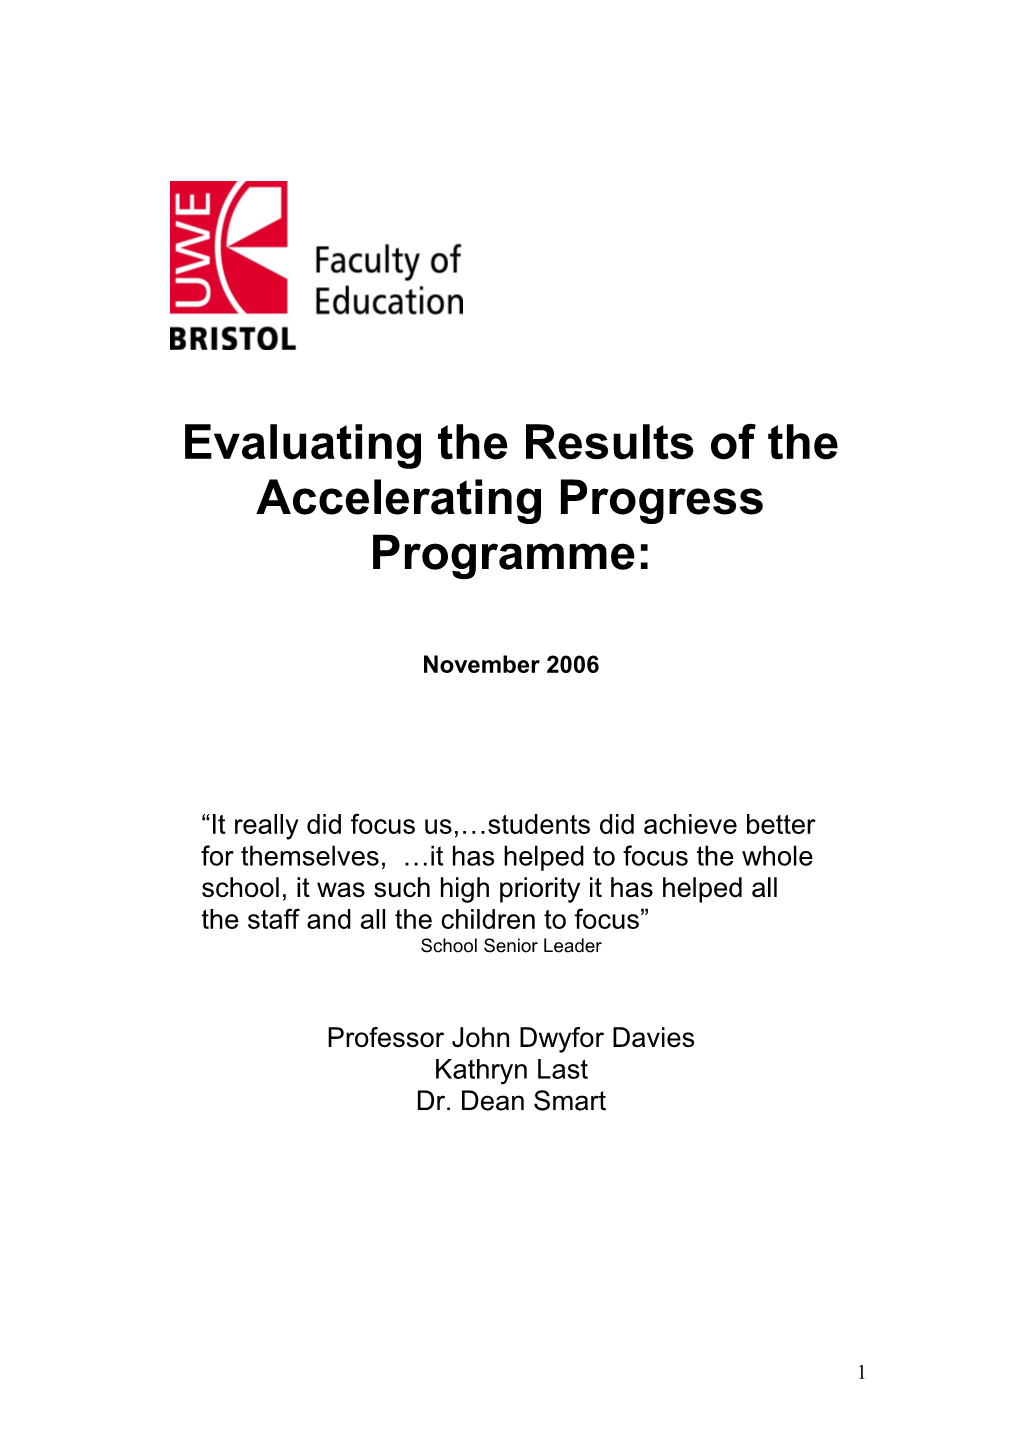 Evaluating the Results of the Accelerating Progress Programme